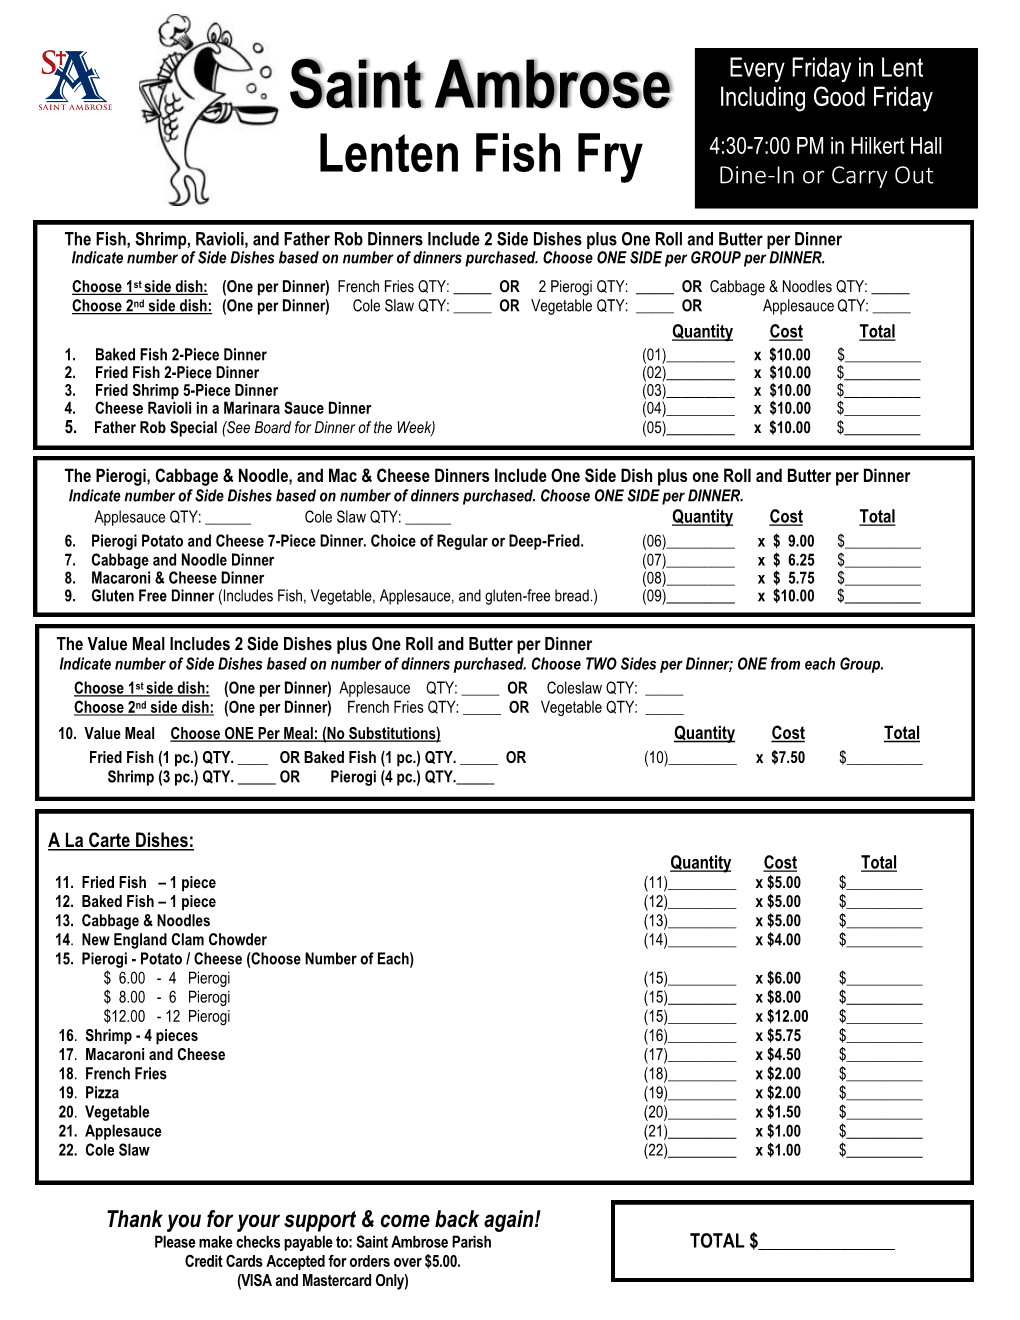 Lenten Fish Fry Dine-In Or Carry Out